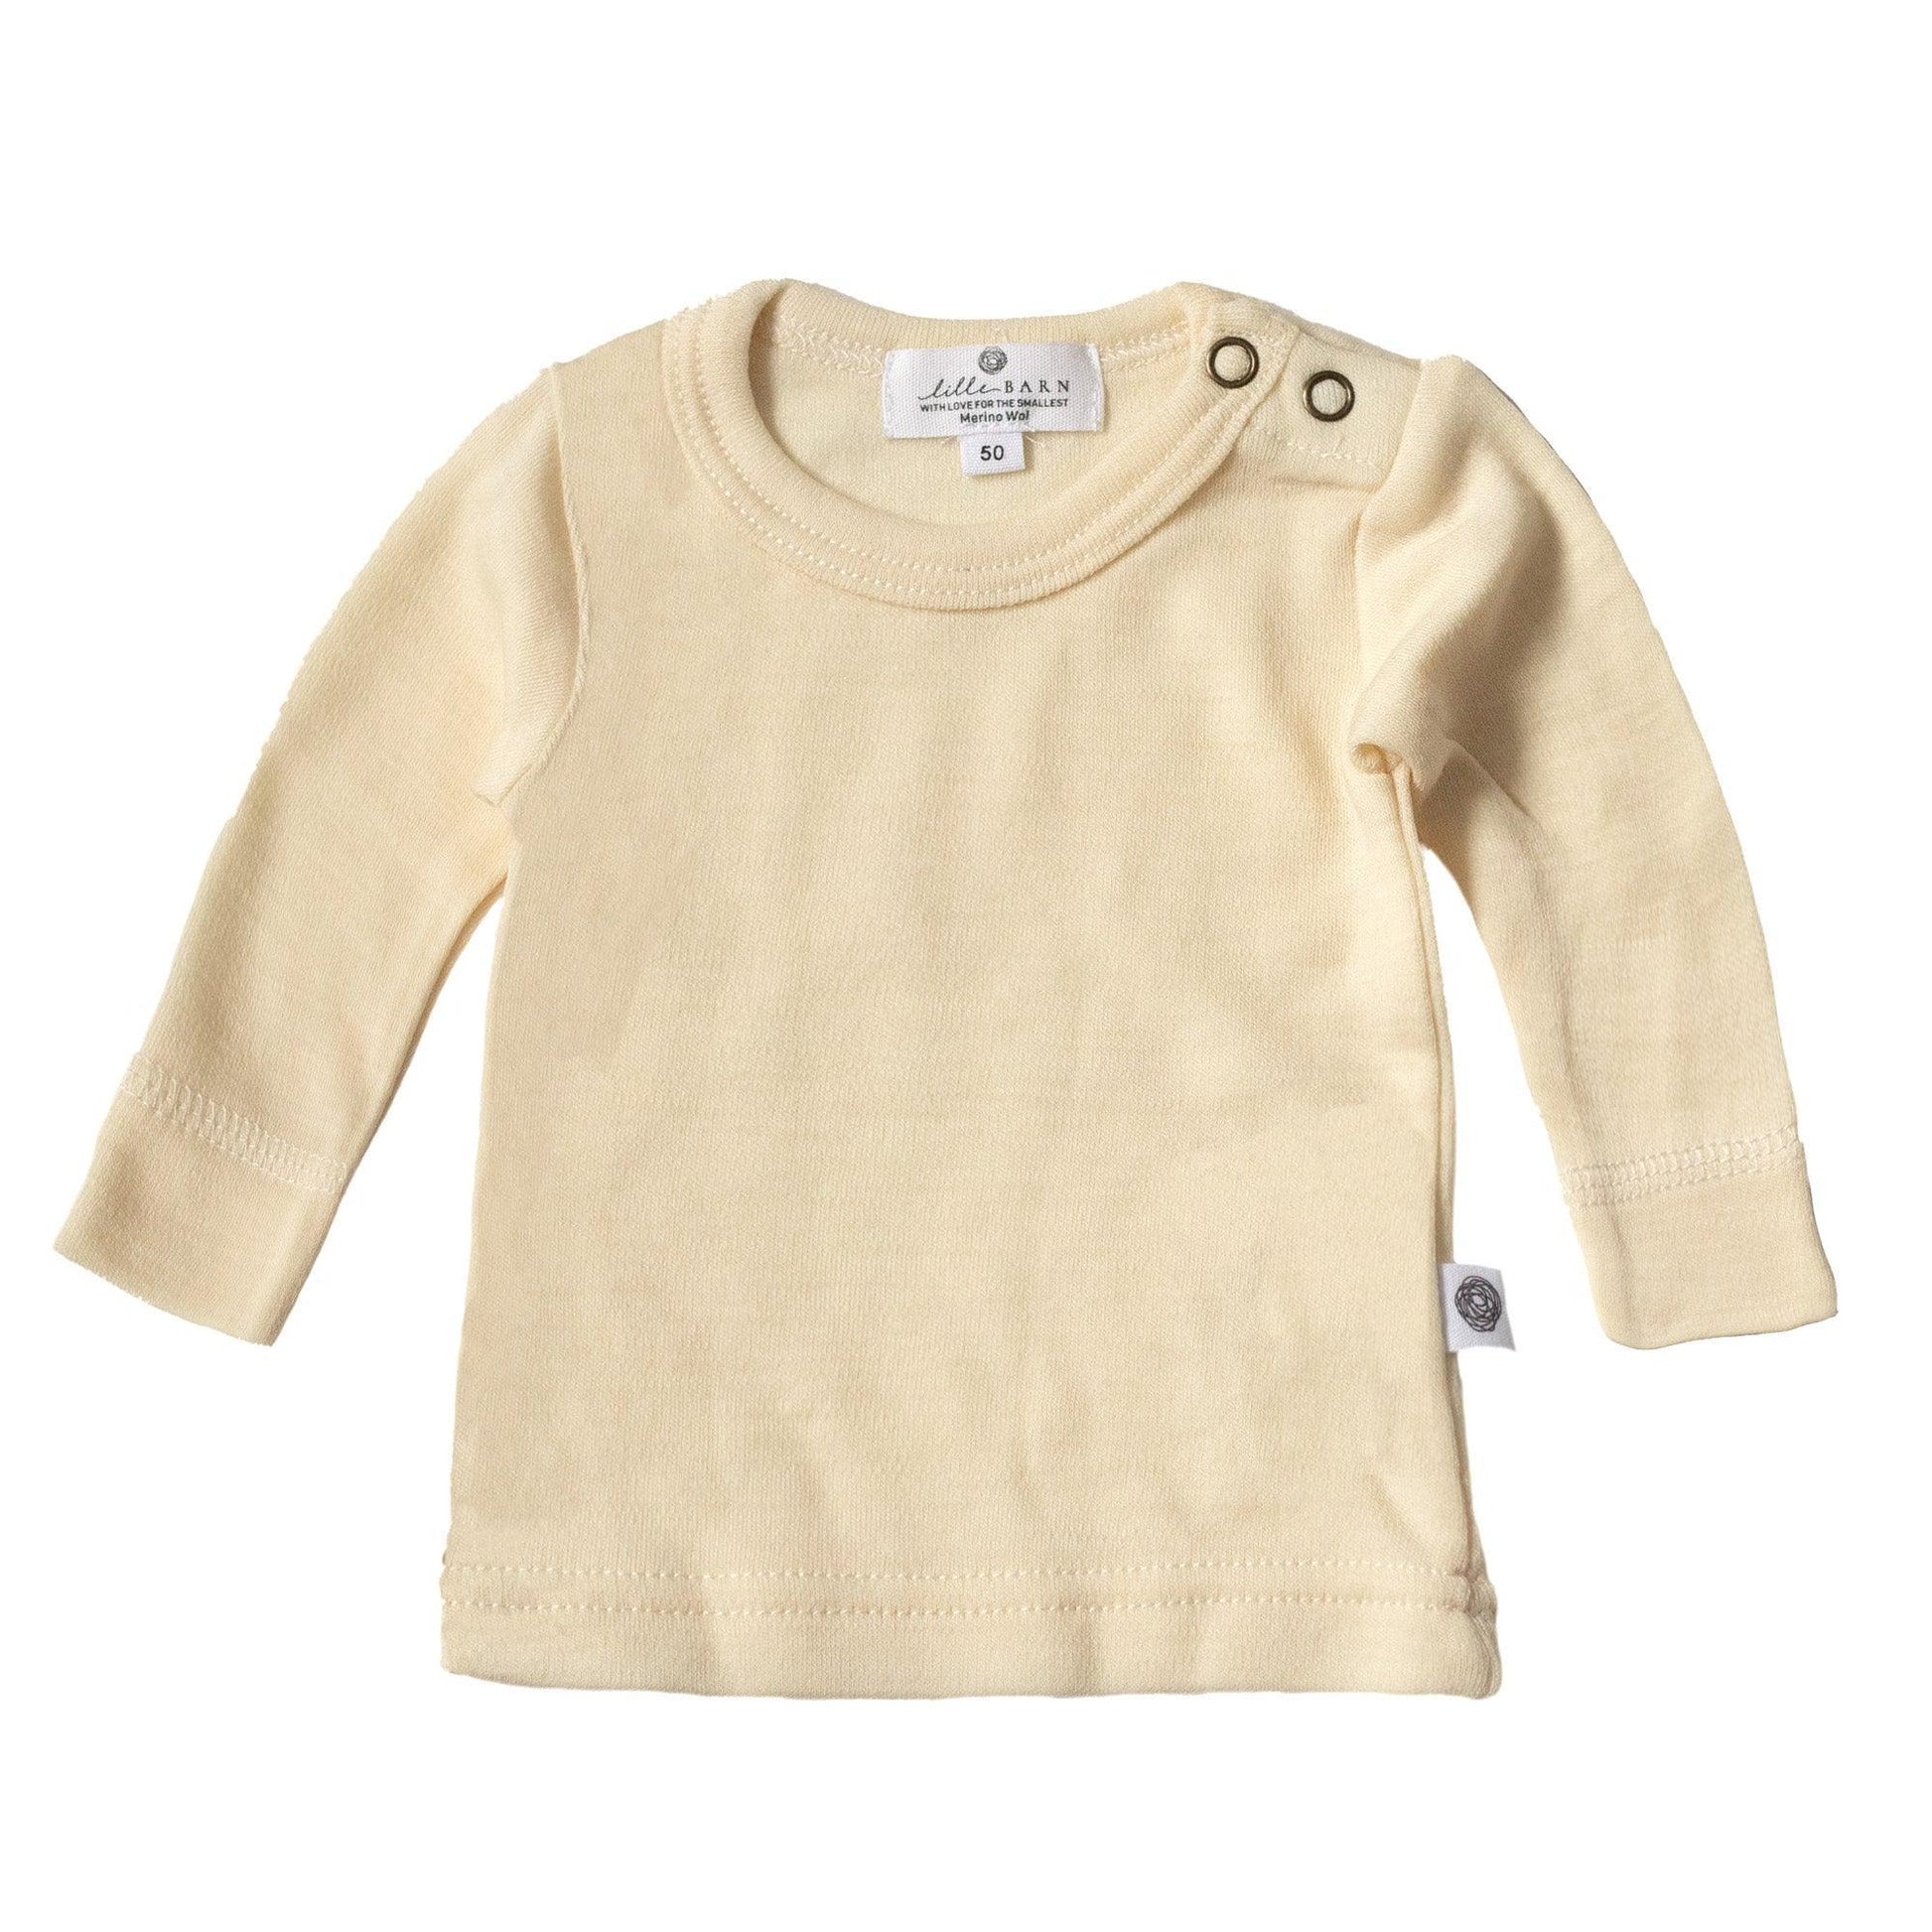 Wollen Baby trui / long sleeve shirt – Merinowol - Naturel - Lille Barn - With ♥ for the smallest